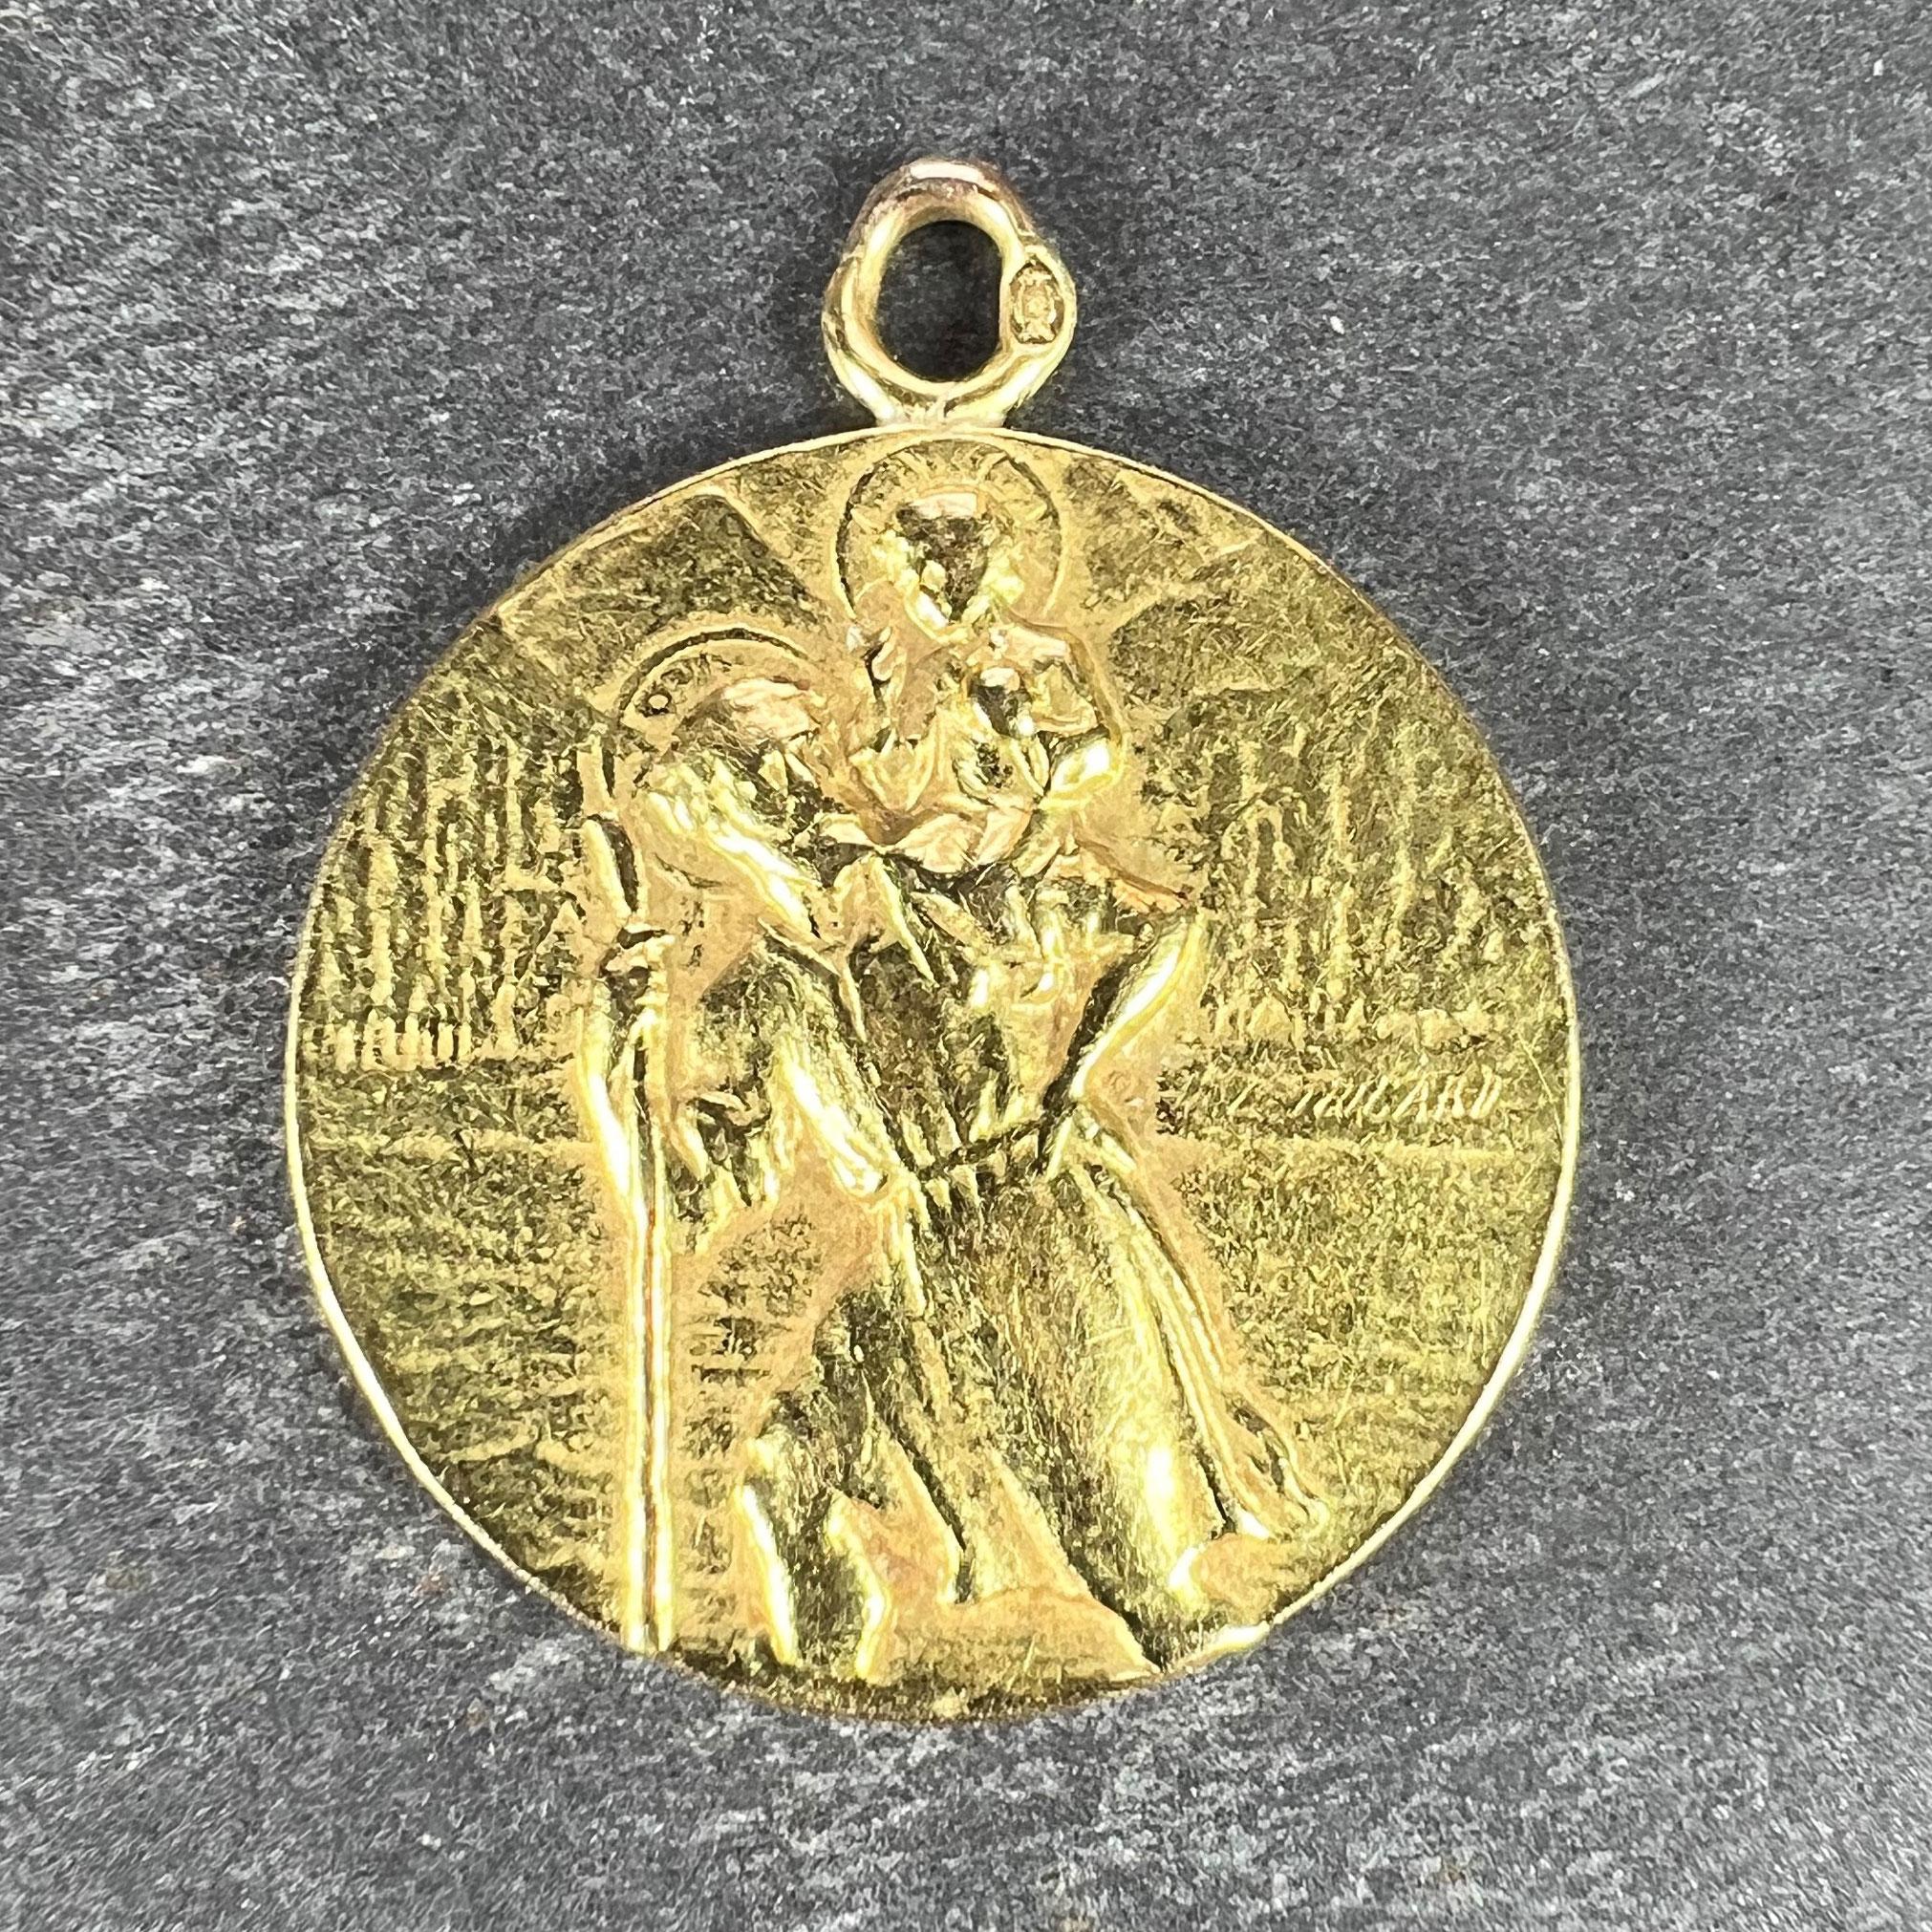 A French 18 karat (18K) yellow gold charm pendant designed as a medal depicting St Christopher as he carries the infant Christ across a river, the reverse depicting a ship in a storm with the words 'Tempestate Securitas' (Safety in the Storm) above